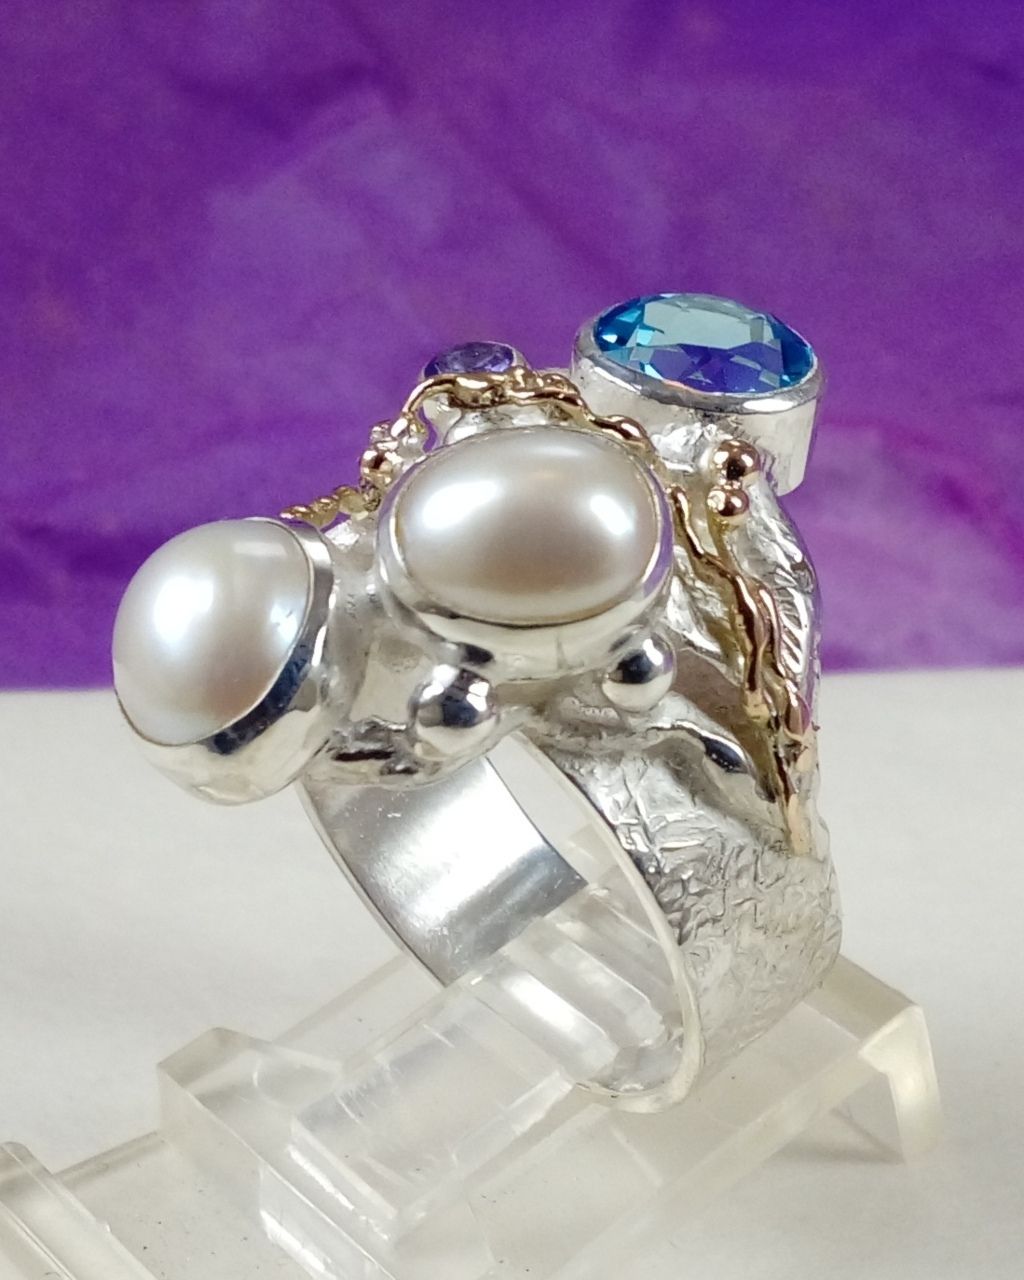 natural pearl and gemstone handcrafted jewelry, silver jewelry with color stones, contemporary jewellery collectible, fine jewellery with gemstones for aucitons, art jewelry with facet cut gemstones and natural pearls, contemporary jewelry with real stones, contemporary jewelry made by artist, Gregory Pyra Piro ring 7320, jewelry with amethyst and blue topaz together, rings for women with topaz and pearl together, rings for women with amethyst and pearl together,jewellery artist in Europe, designer jewellery sold at auctions and art galleries, where to find auctions with fine art and designer jewellery, bidding on auctions with designer jewellery, rings for women with amethyst and blutopaz, rings sold in art and craft galleries